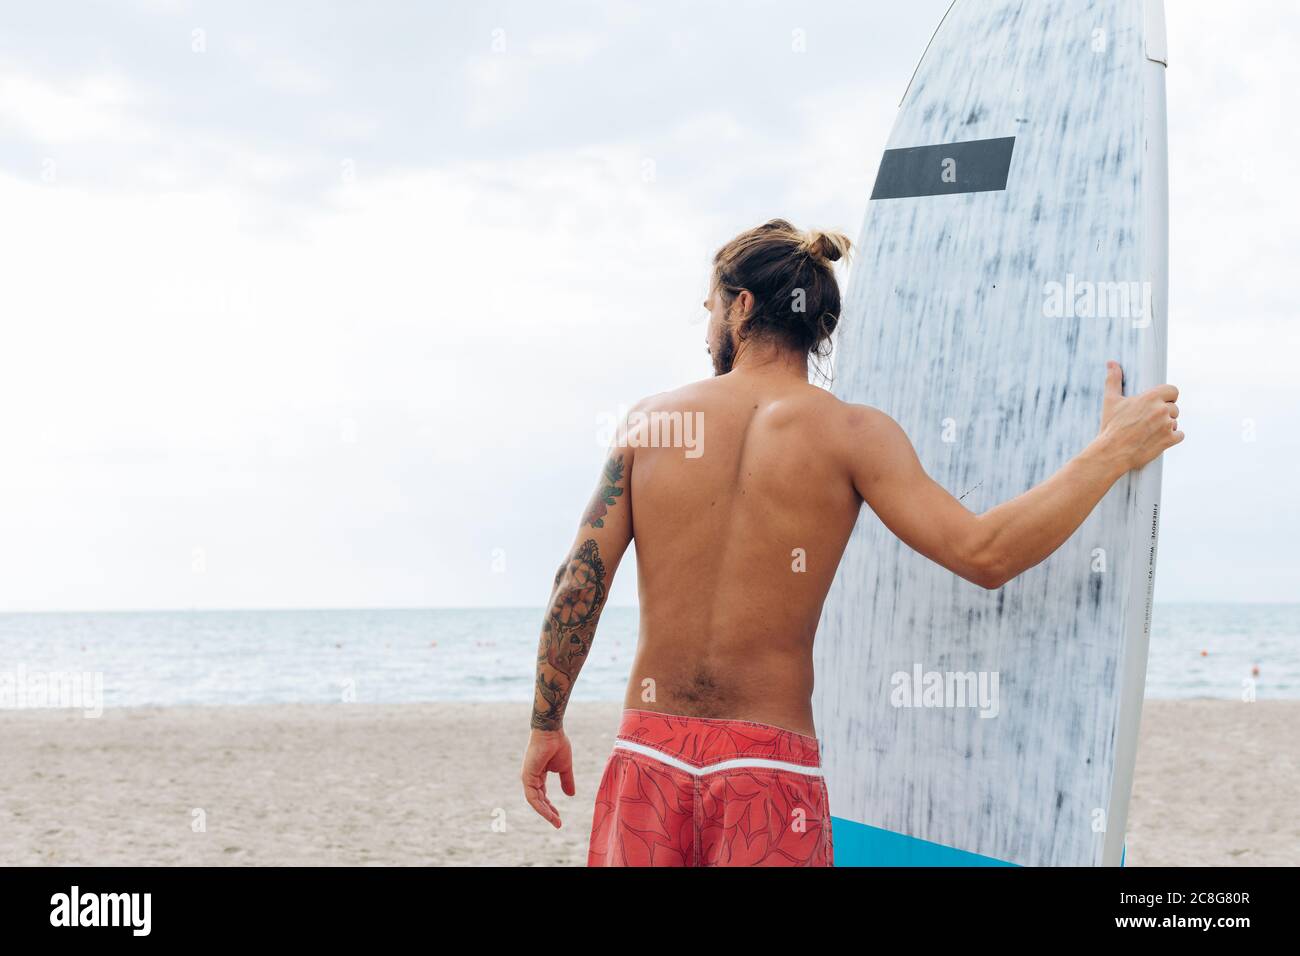 Surfer with surfboard by seaside Stock Photo